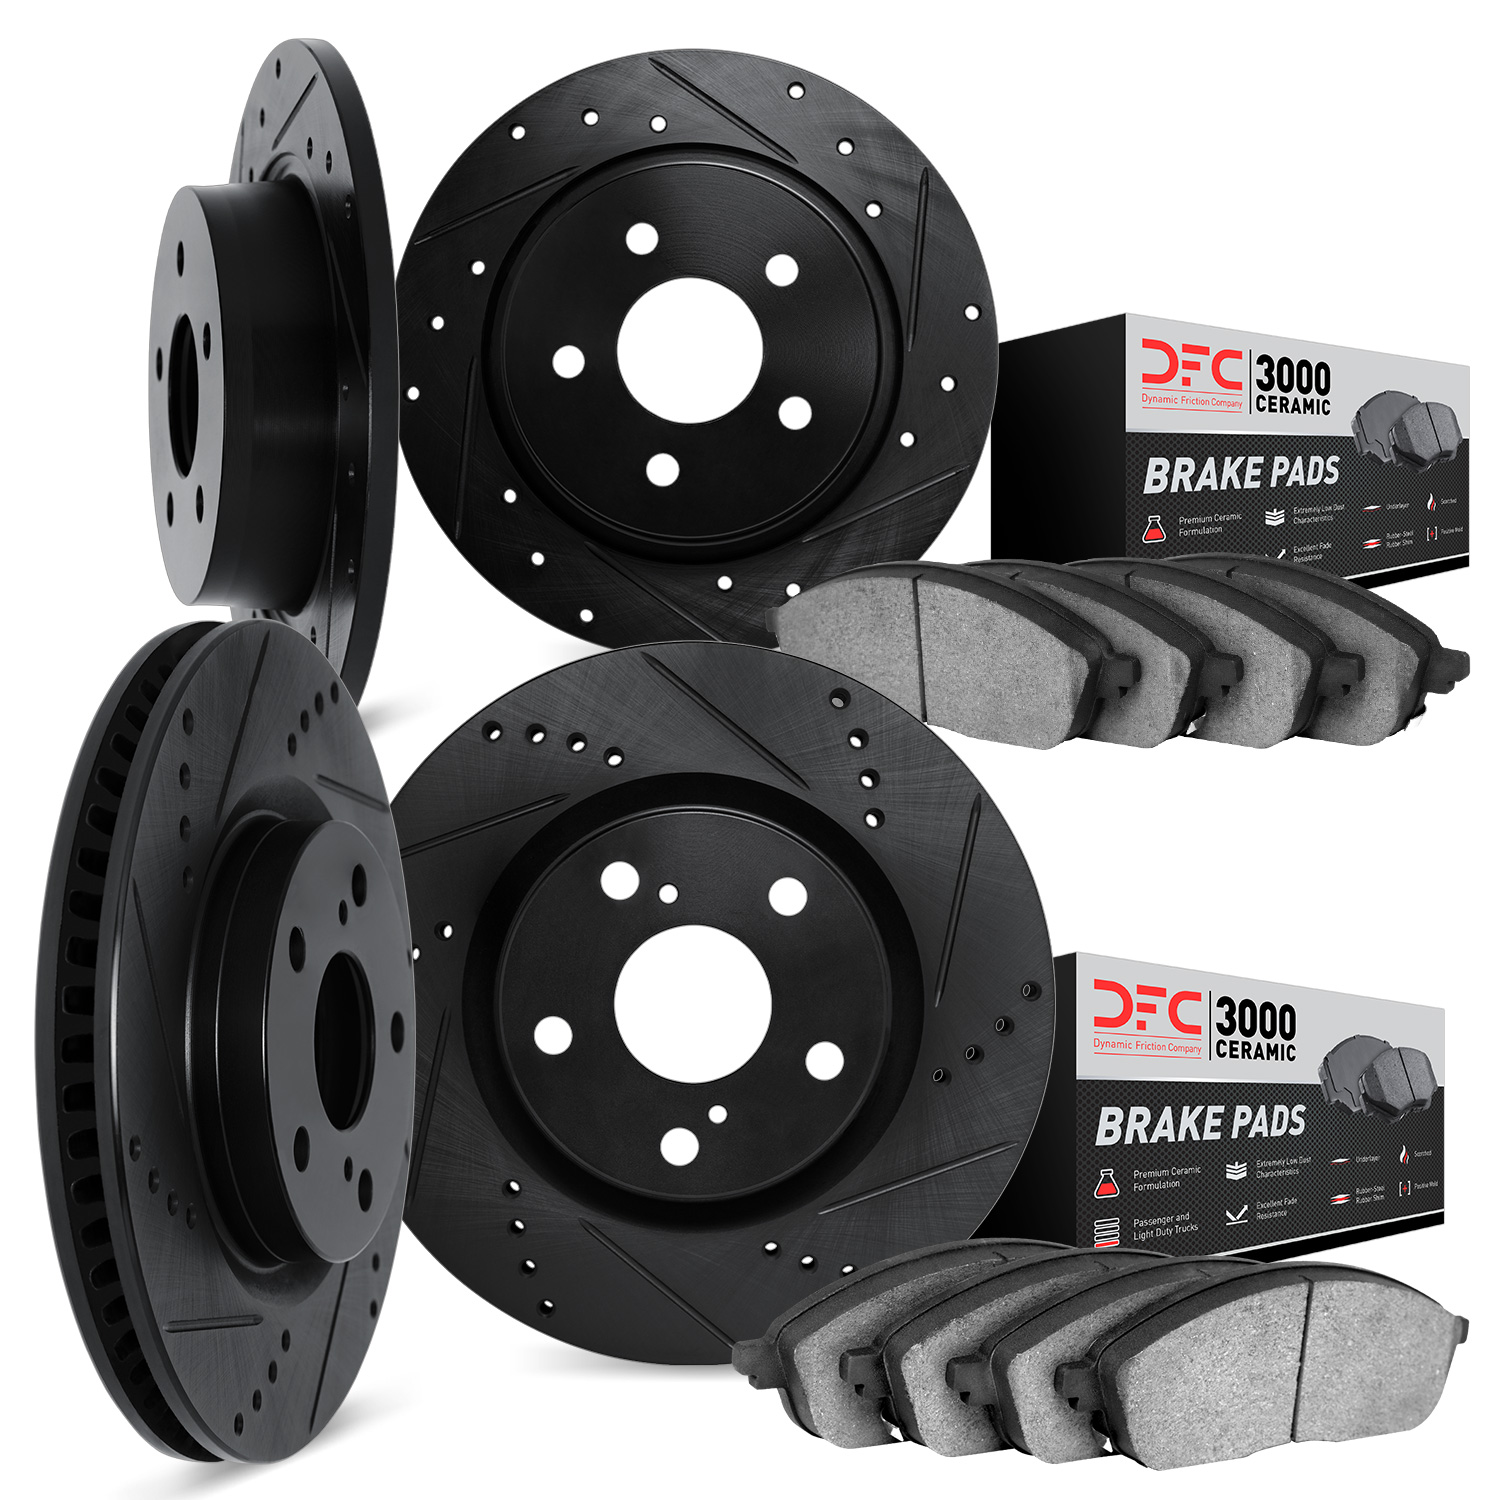 8304-58013 Drilled/Slotted Brake Rotors with 3000-Series Ceramic Brake Pads Kit [Black], 2019-2019 Acura/Honda, Position: Front